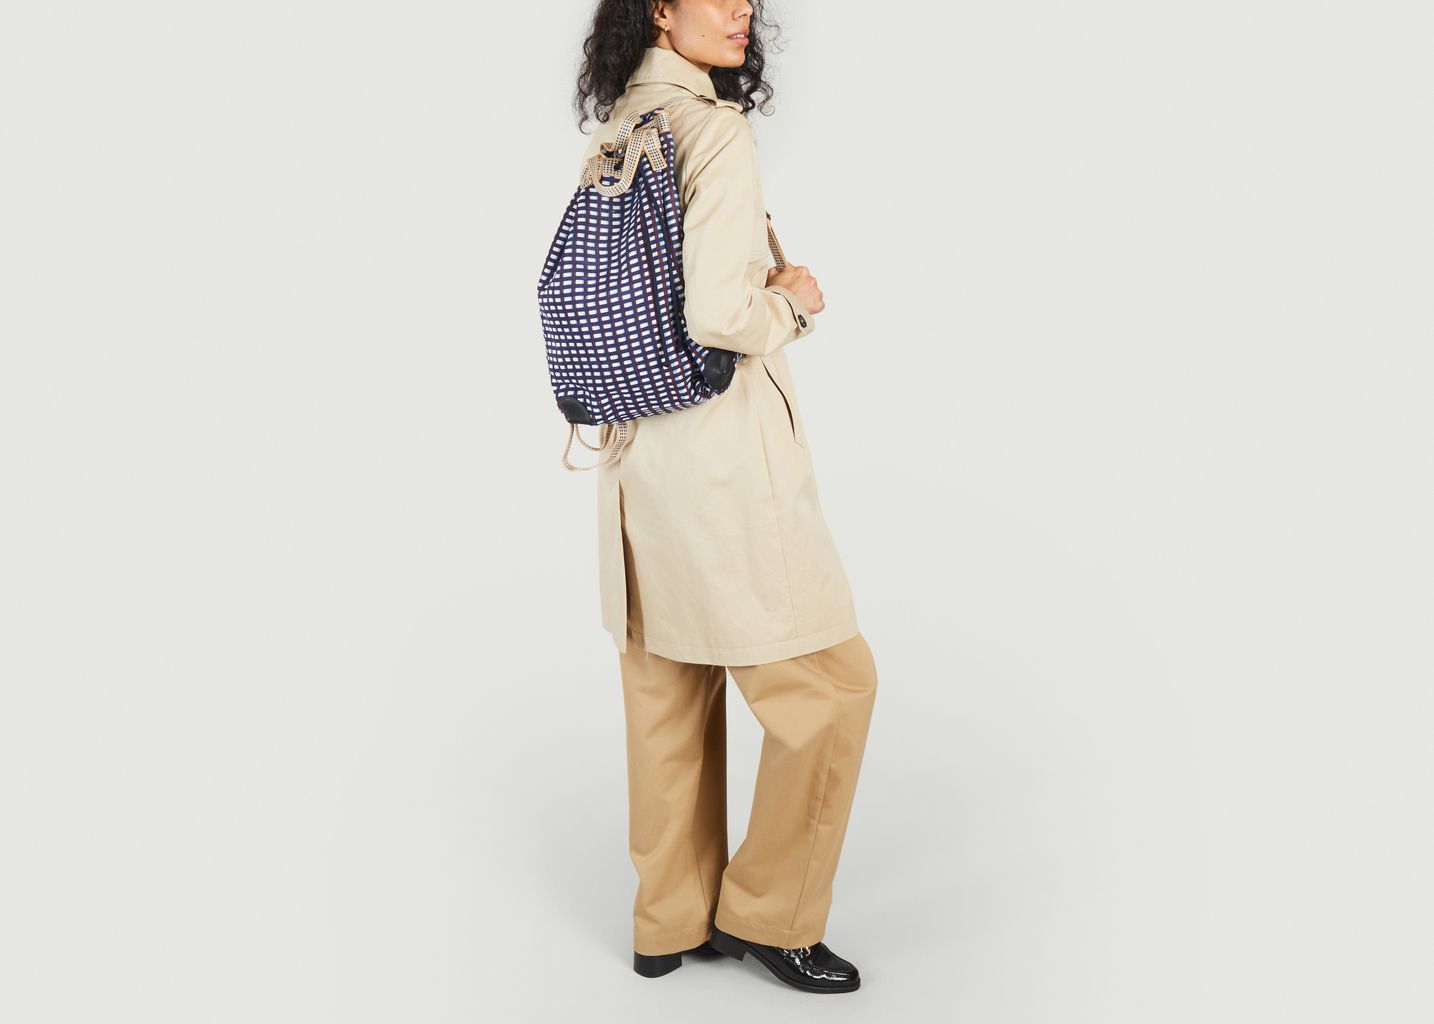 Hand woven linen backpack Small  - Epice